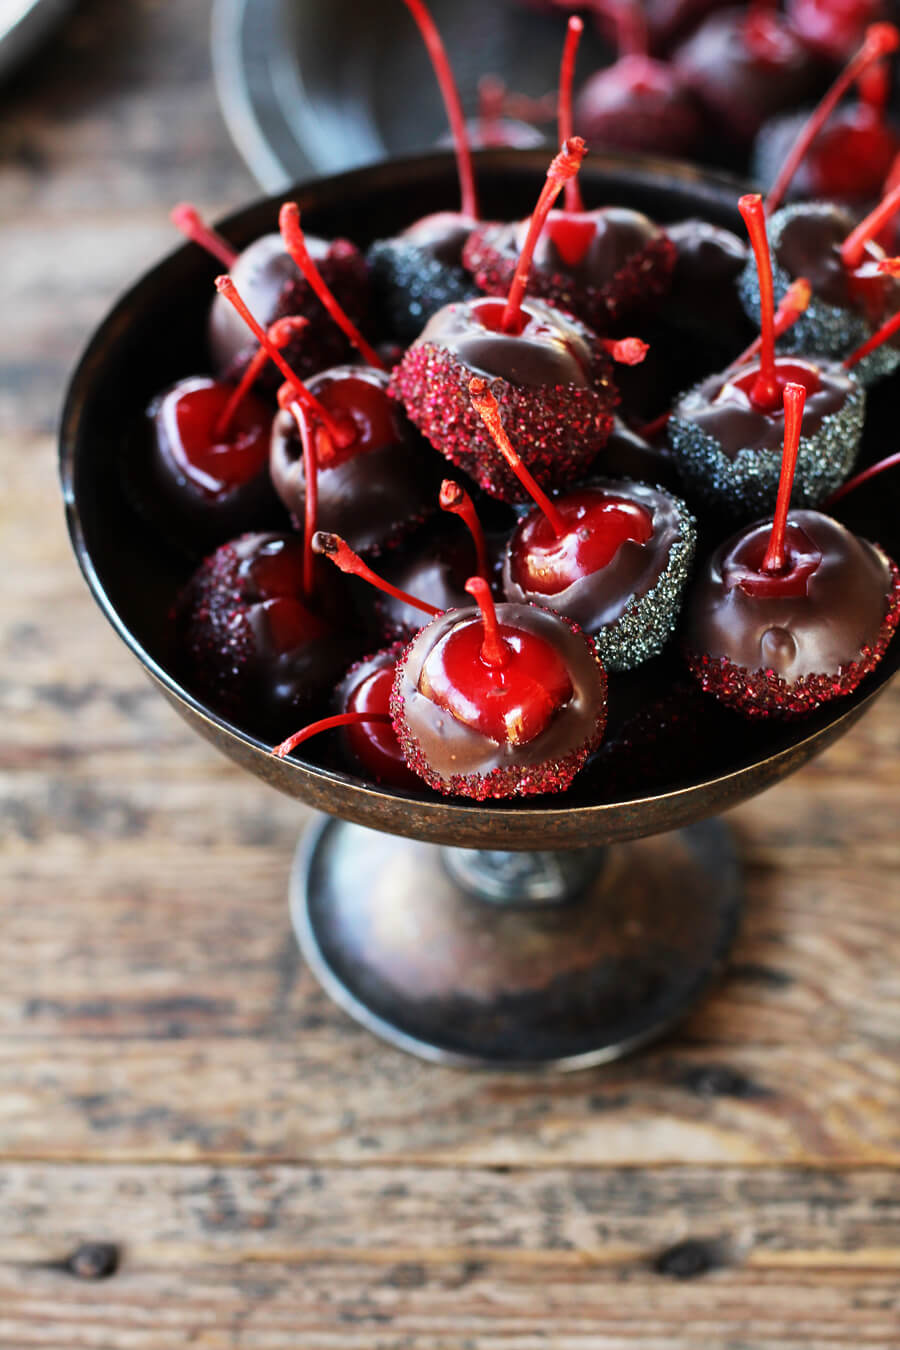 A vintage silver serving dish filled with chocolate covered cherries.